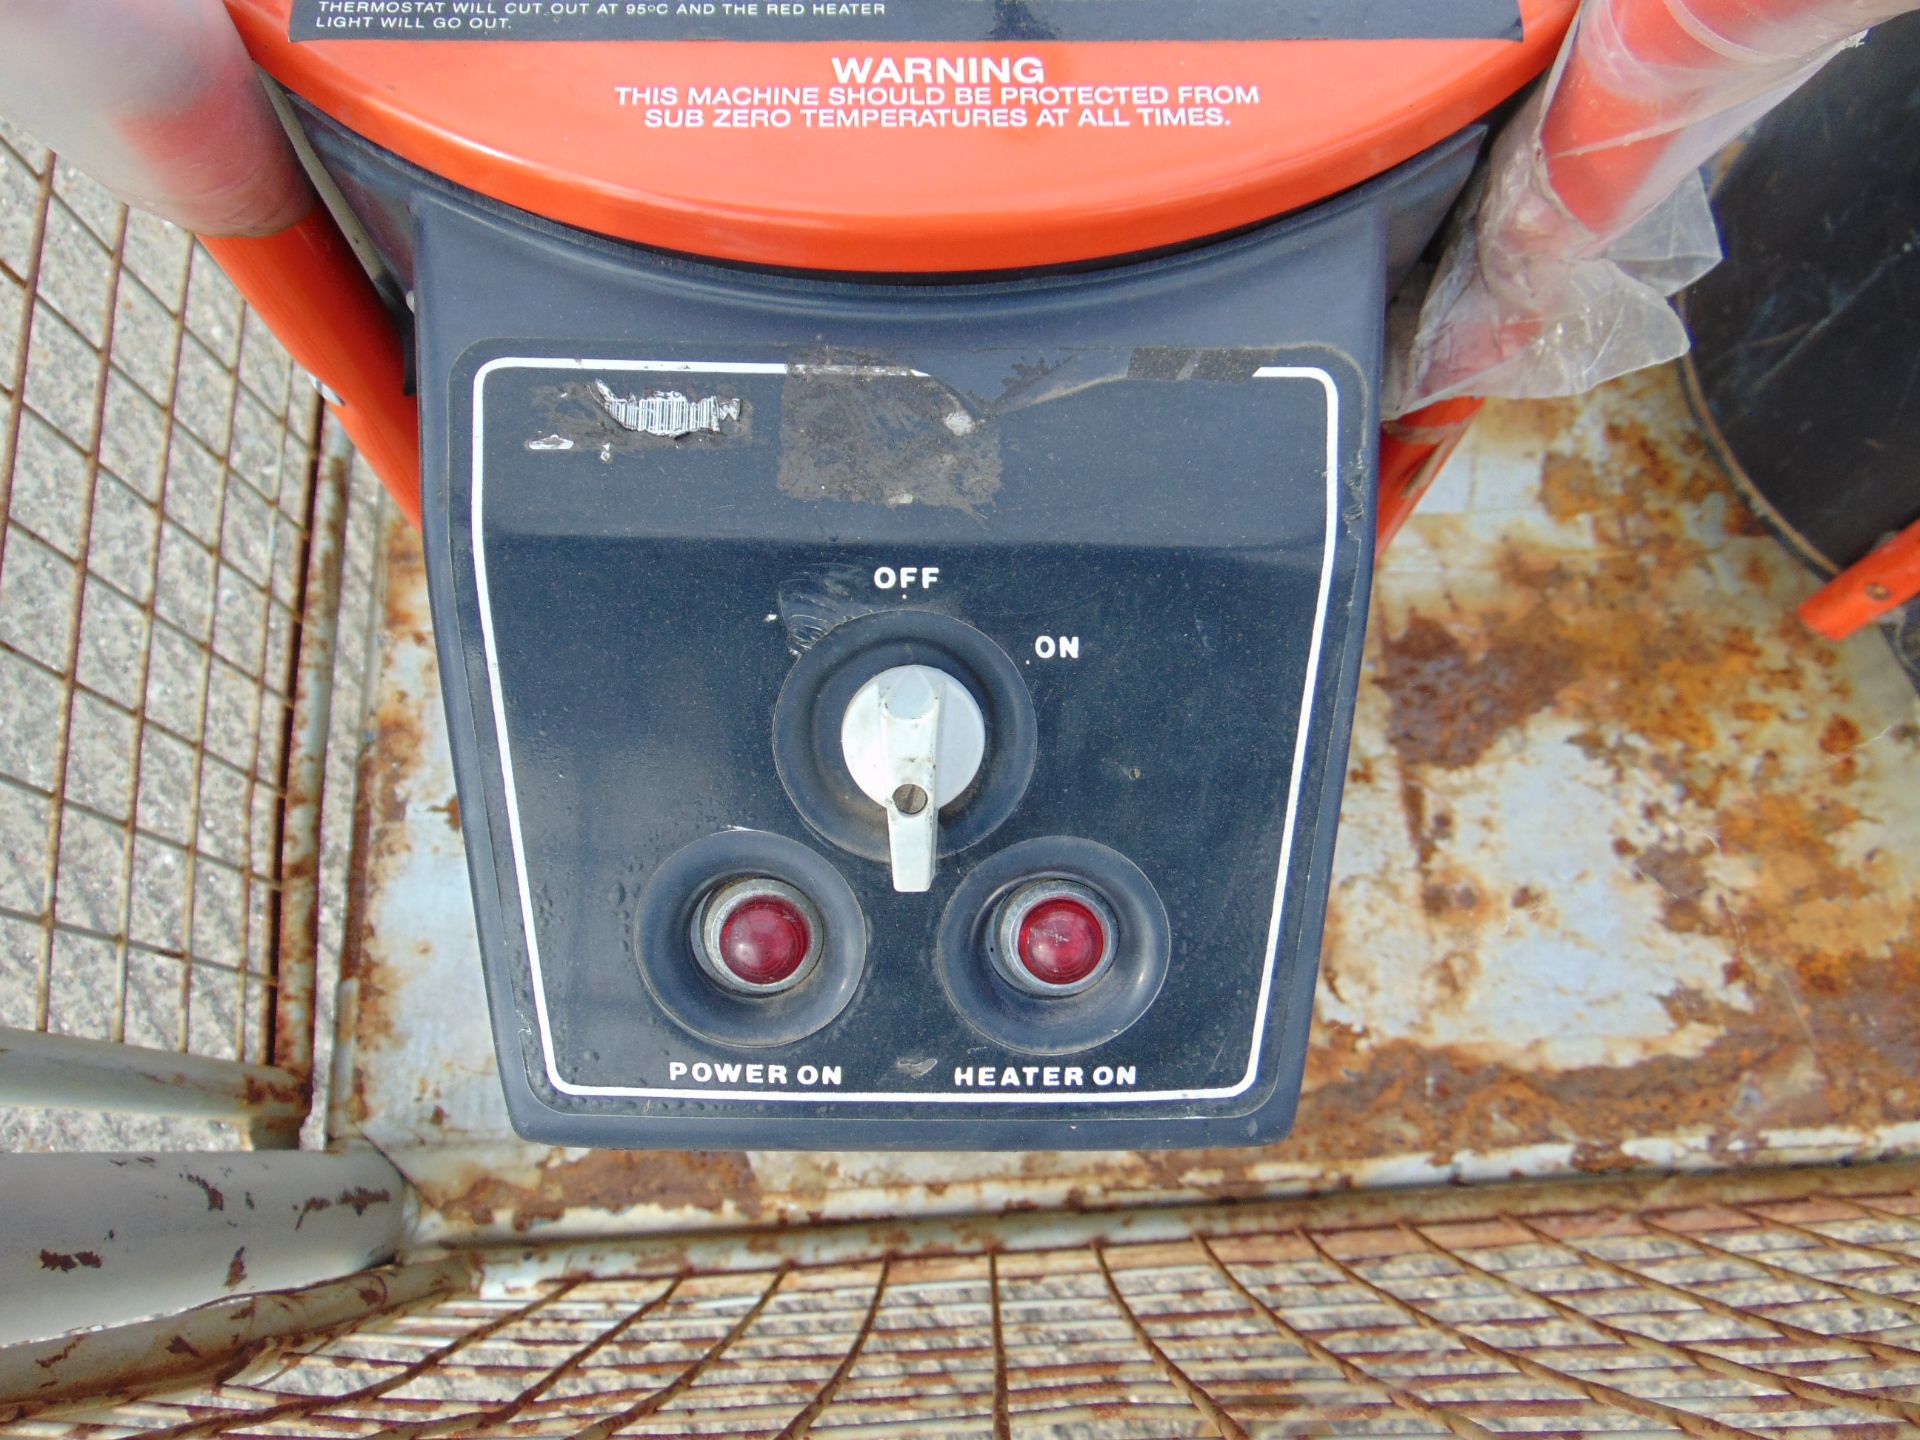 2x Wesley Hot Water Pressure Washers - Image 4 of 6